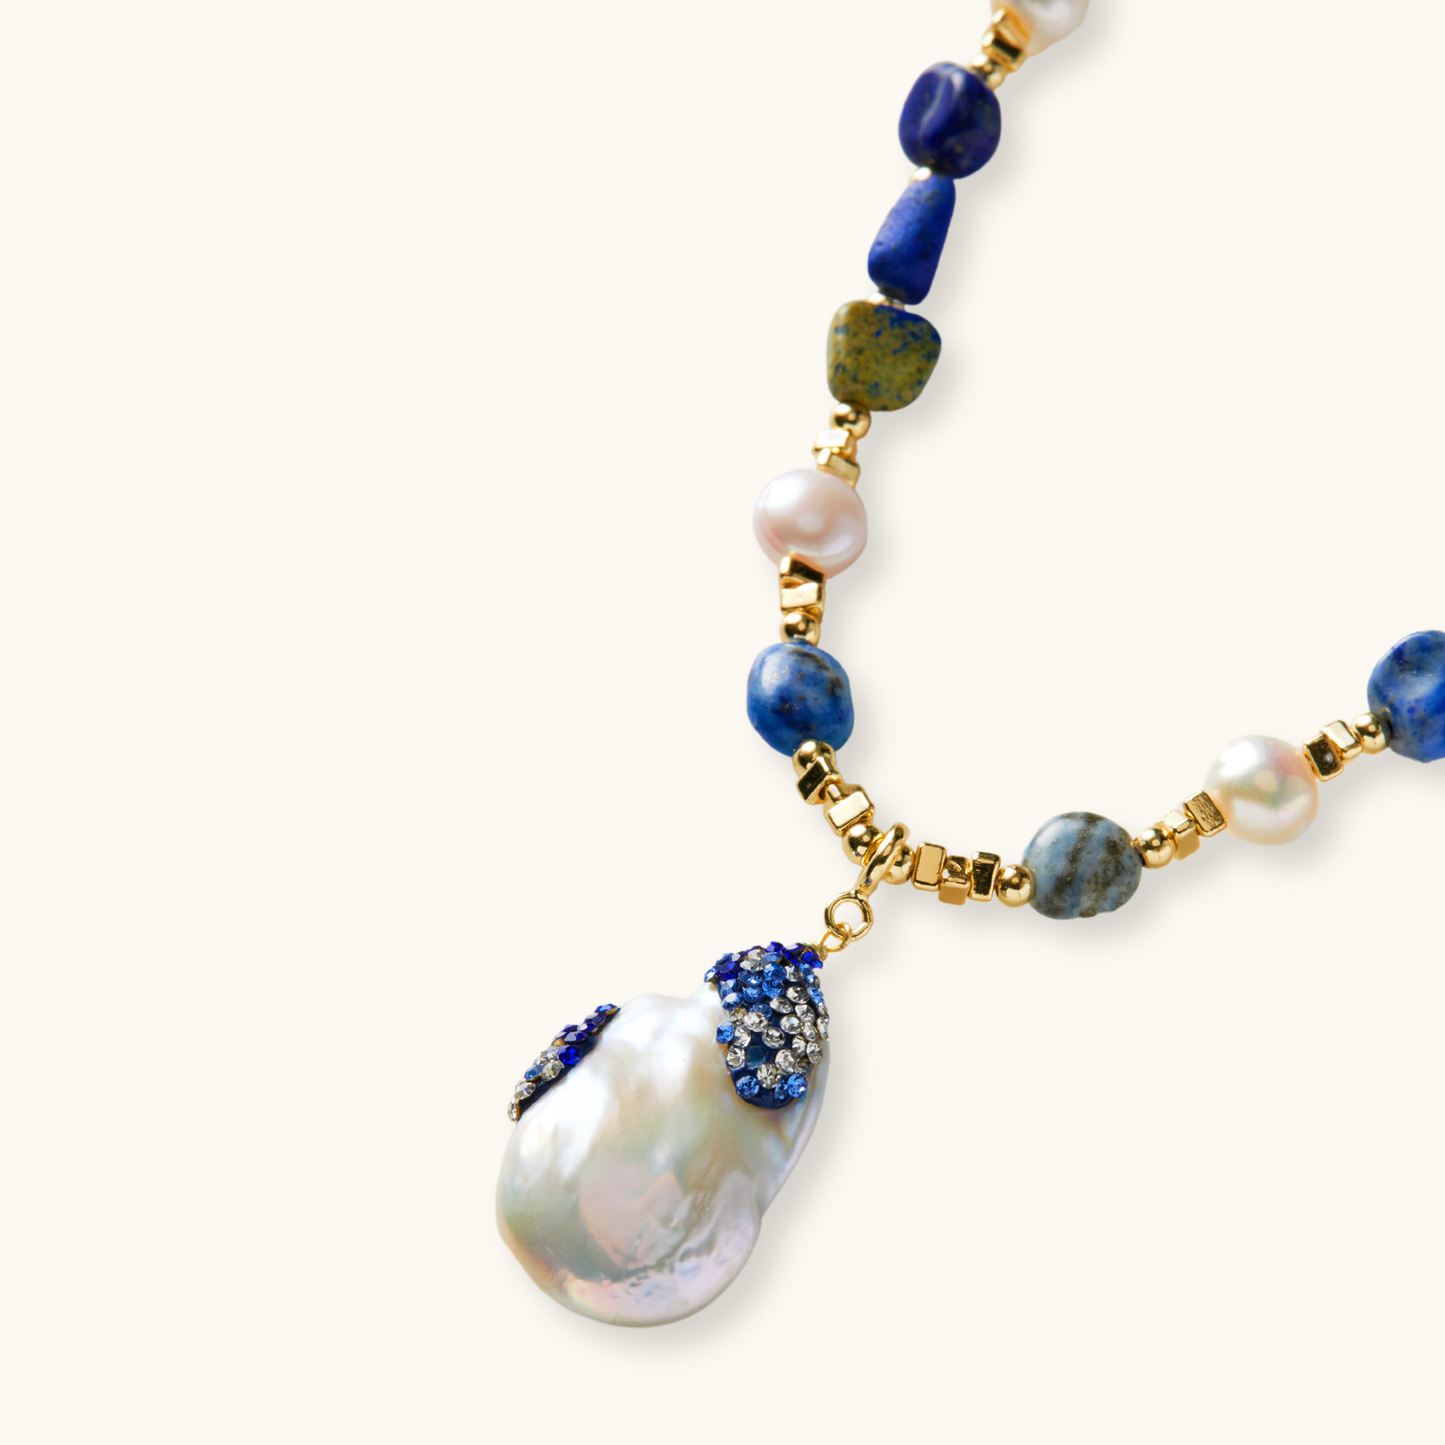 Handcrafted necklace with lapis lazuli and Baroque pearl with gradient blue and white zirconia accents